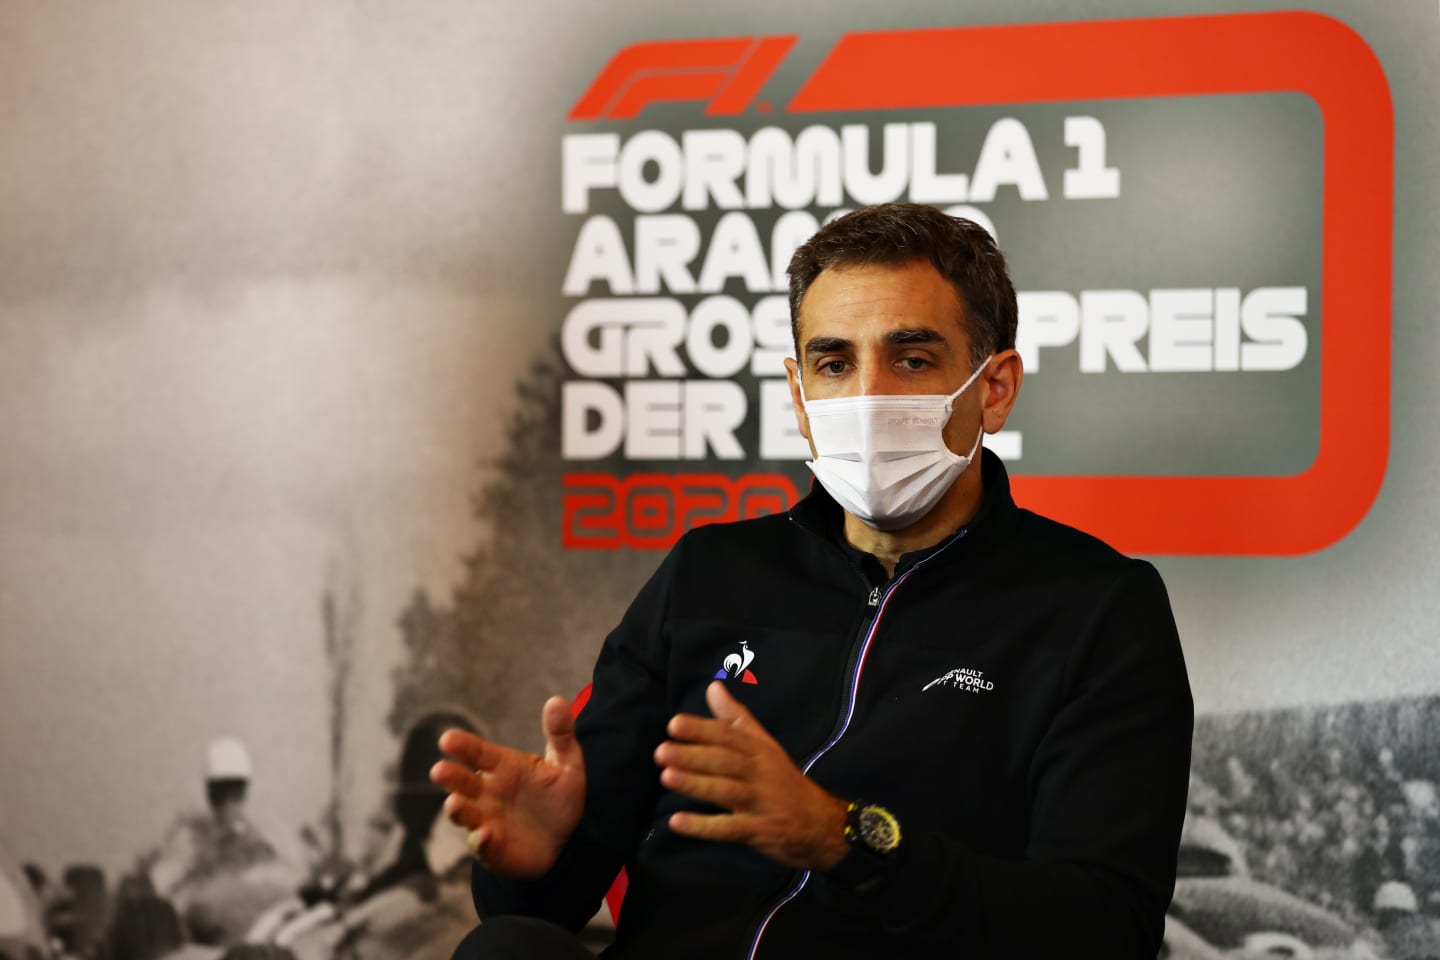 NUERBURG, GERMANY - OCTOBER 09: Renault Sport F1 Managing Director Cyril Abiteboul talks in the Team Principals Press Conference during practice ahead of the F1 Eifel Grand Prix at Nuerburgring on October 09, 2020 in Nuerburg, Germany. (Photo by Joe Portlock/Getty Images)